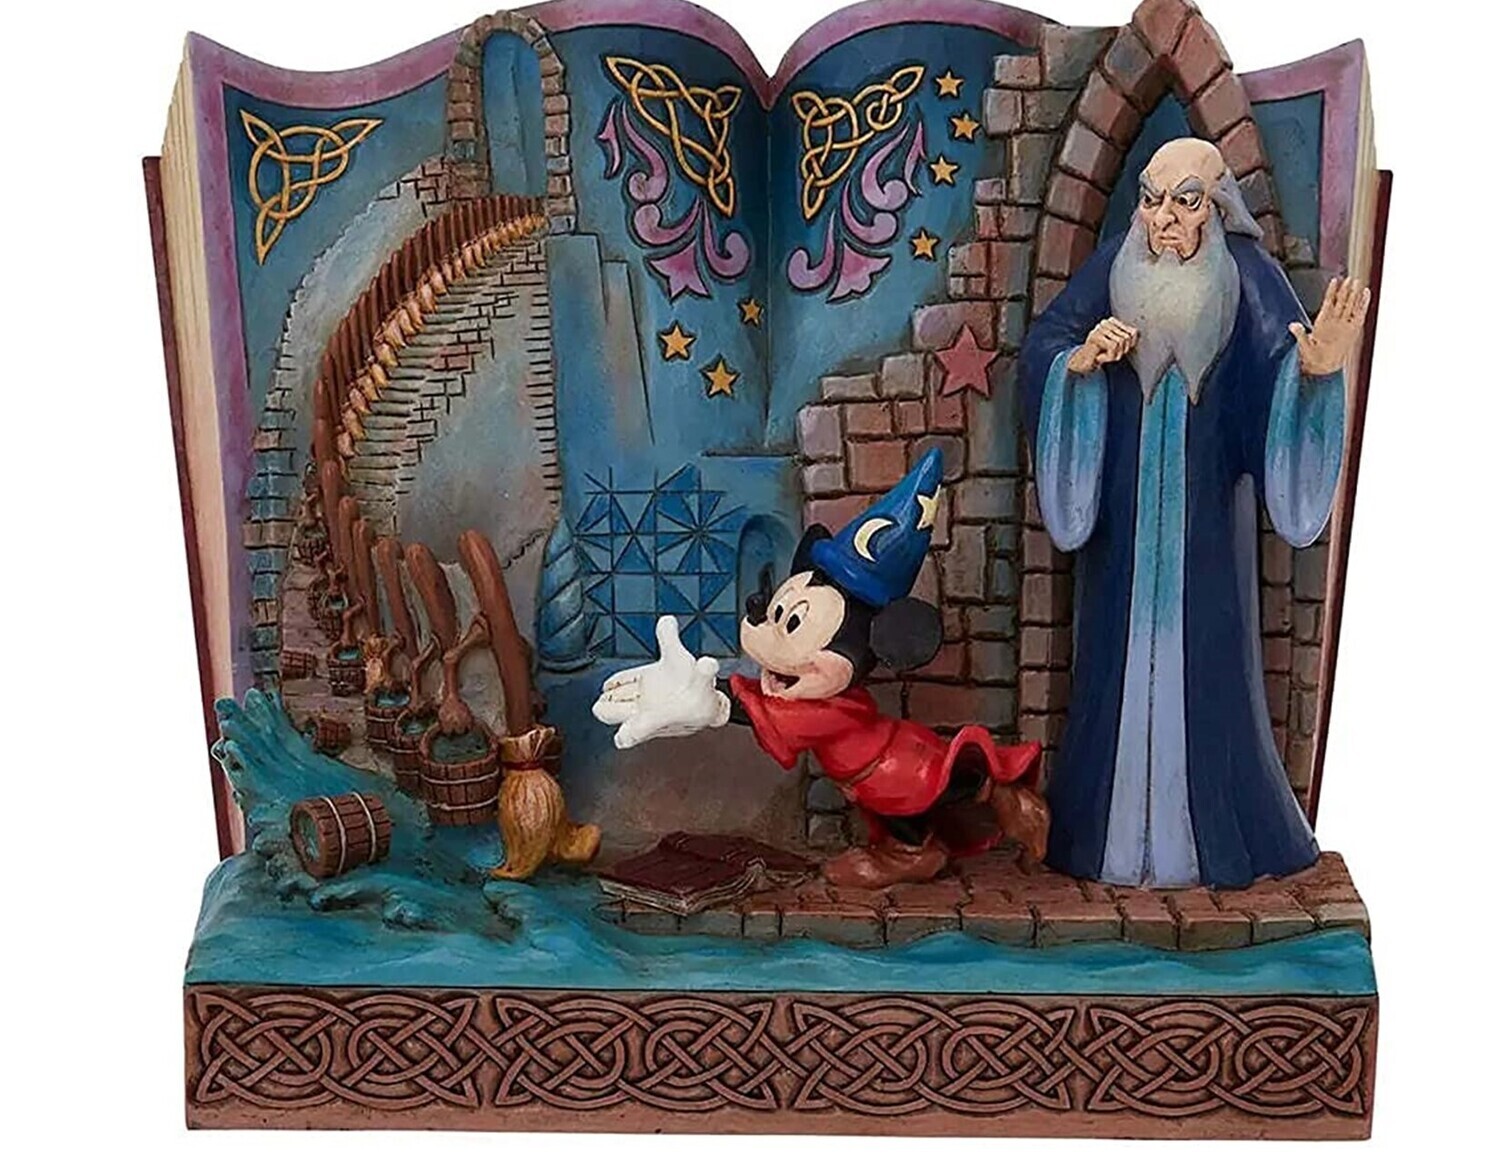 Jim Shore Disney Traditions "Sorcerer Mickey with Storybook" 6.75" Figurine (6010883)